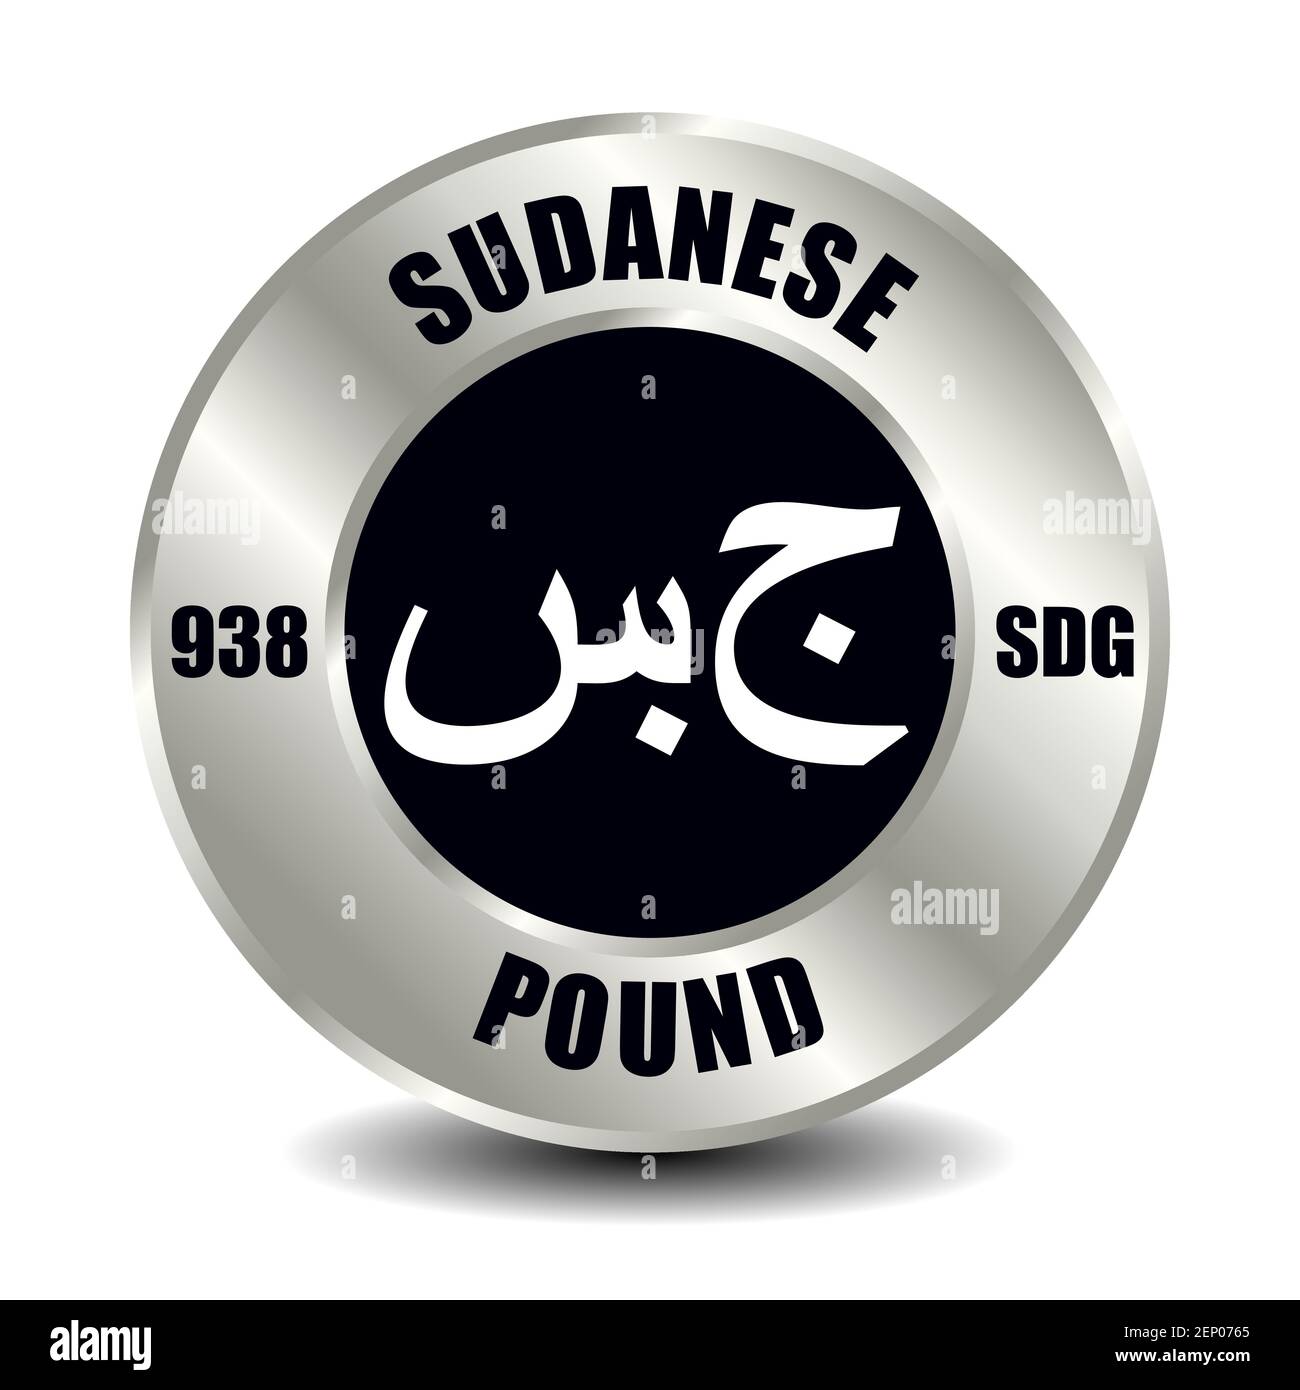 Sudan money icon isolated on round silver coin. Vector sign of currency symbol with international ISO code and abbreviation Stock Vector